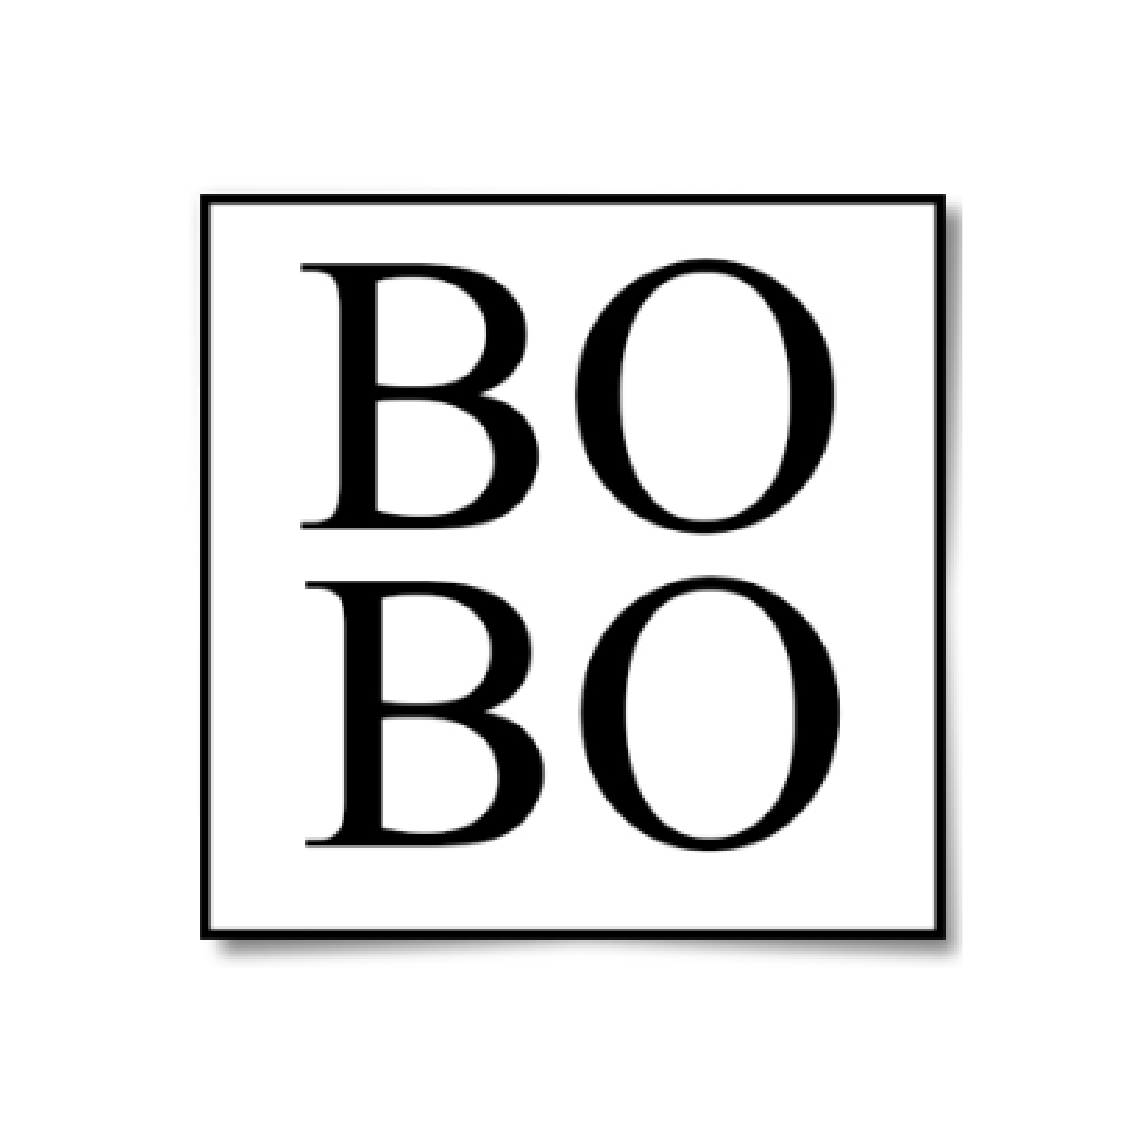 bobo logo, one of our customers, to show its results